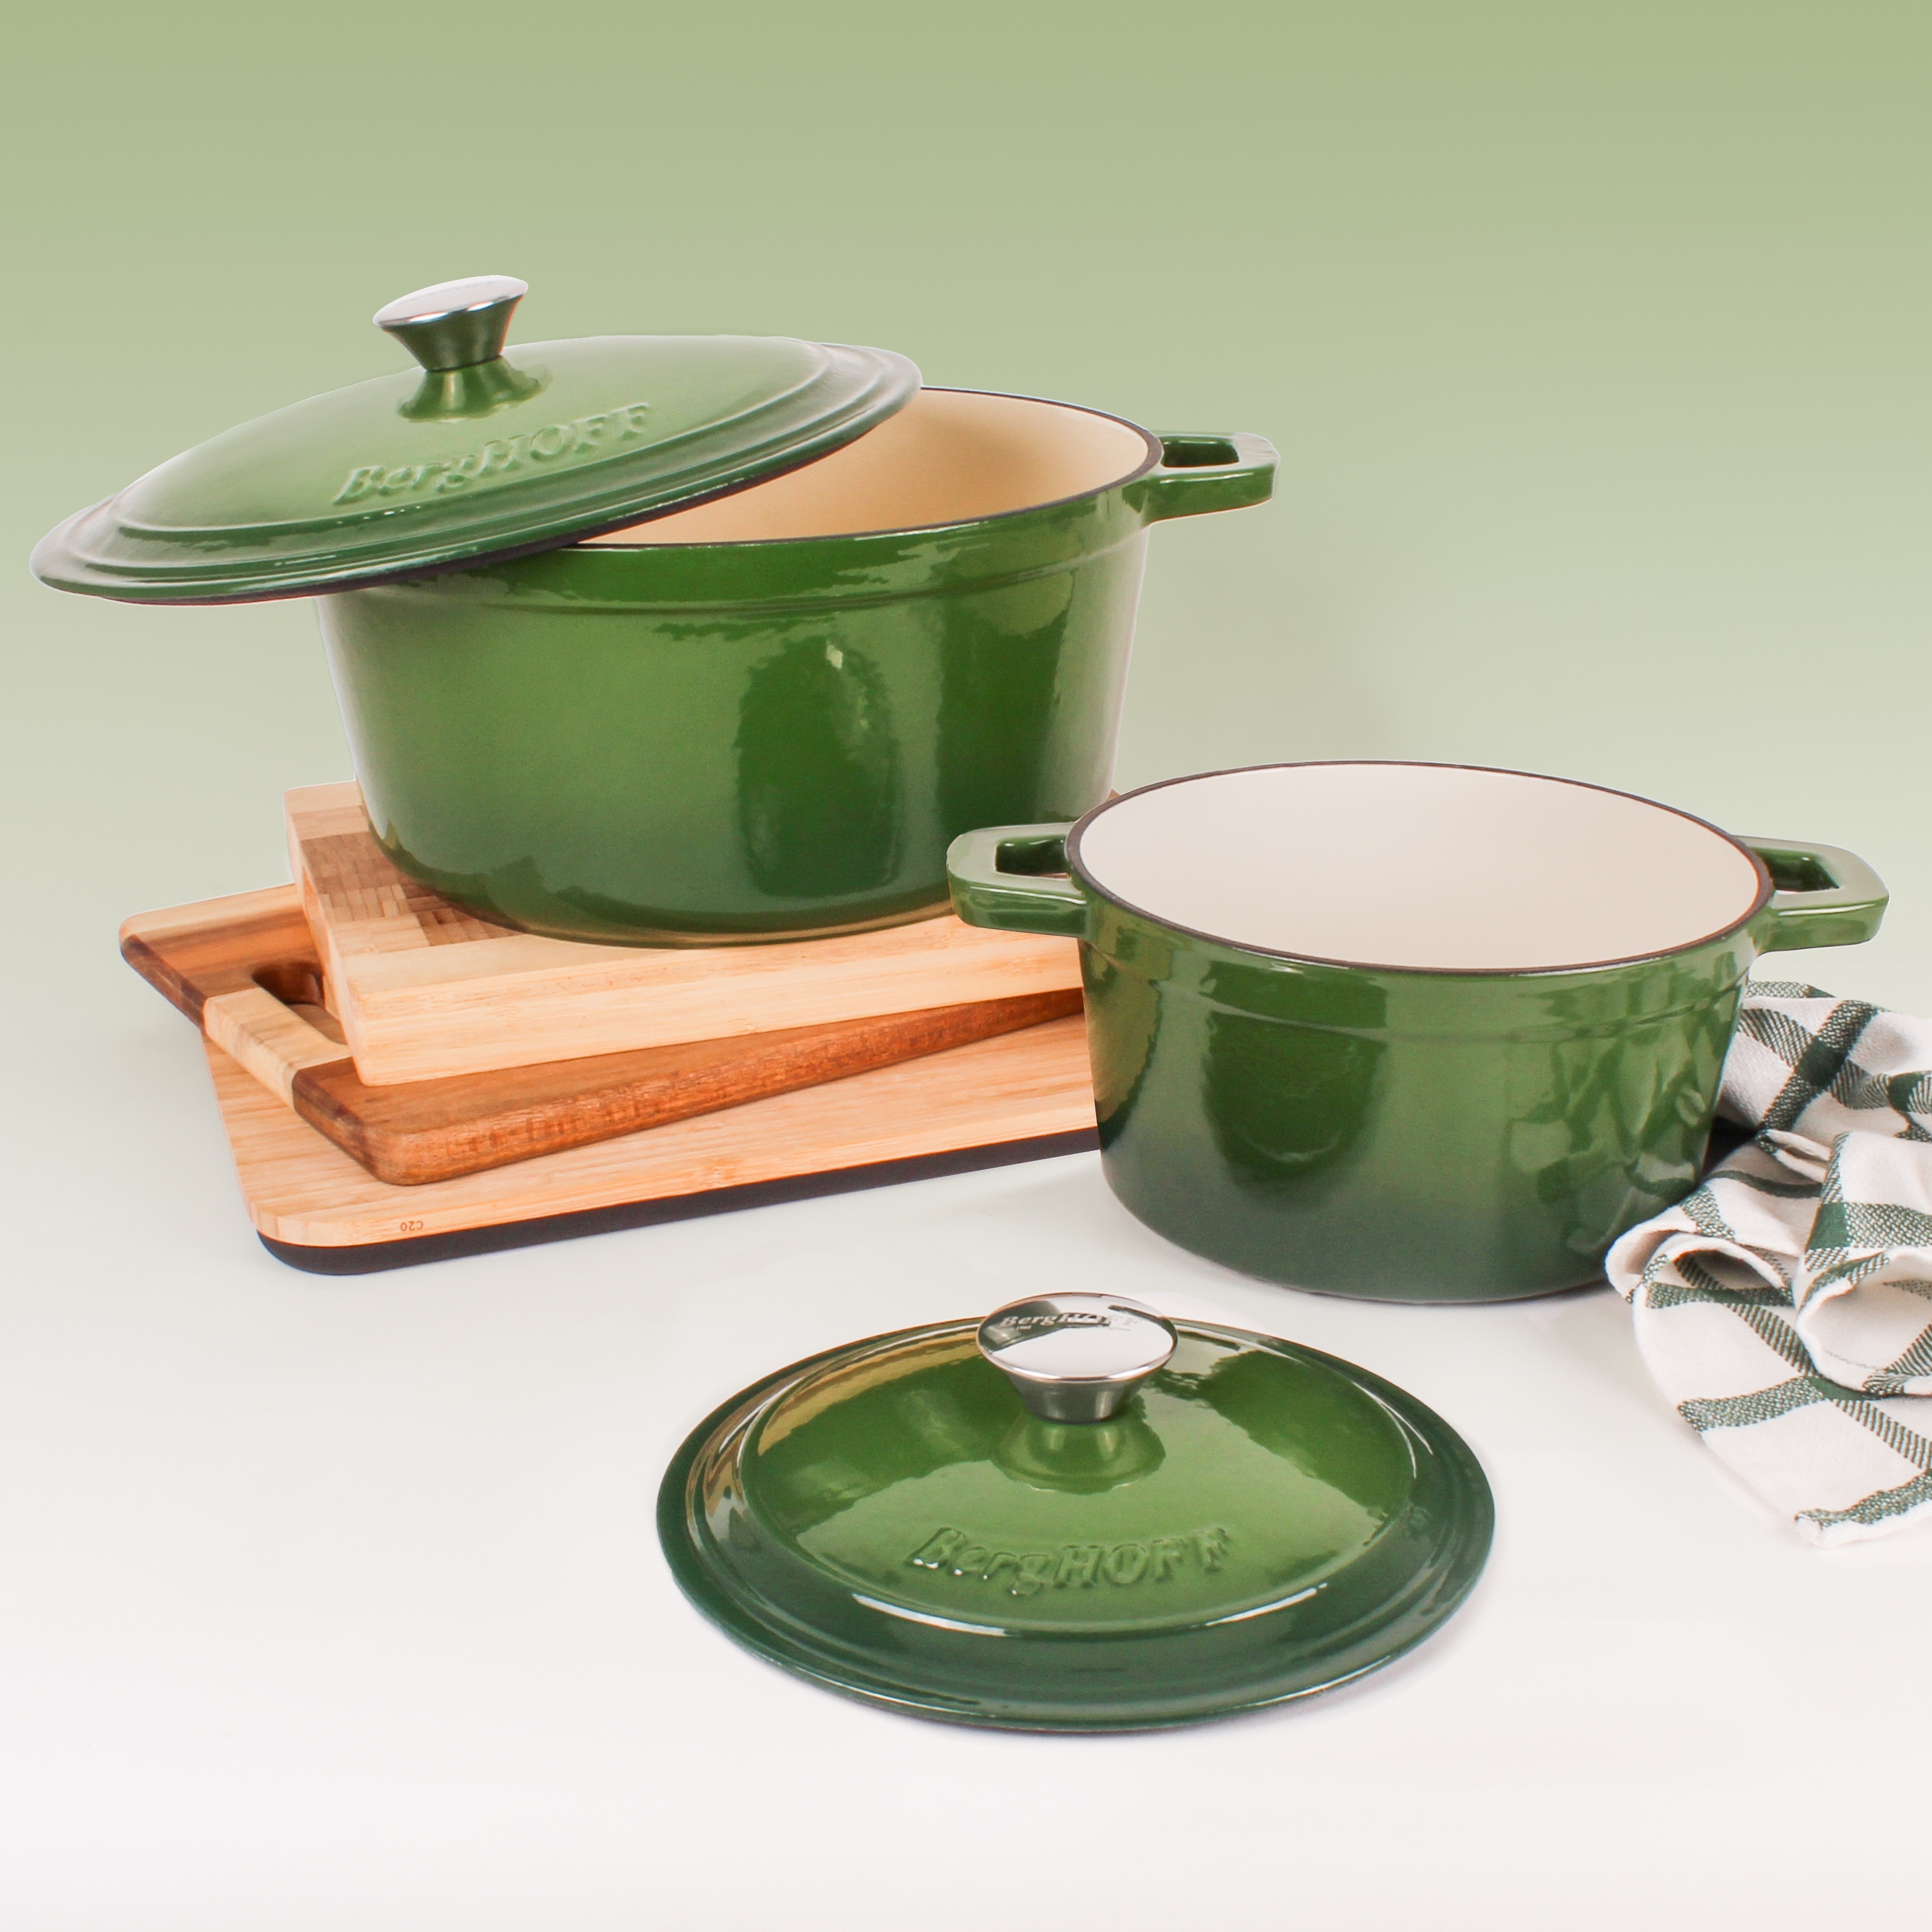 https://ak1.ostkcdn.com/images/products/is/images/direct/3be3387eb35b82c6637e798c873e4542025bcef3/Neo-4pc-Cast-Iron-Set-3qt-Covered-Dutch-Oven-%26-7qt-Covered-Stockpot-Green.jpg